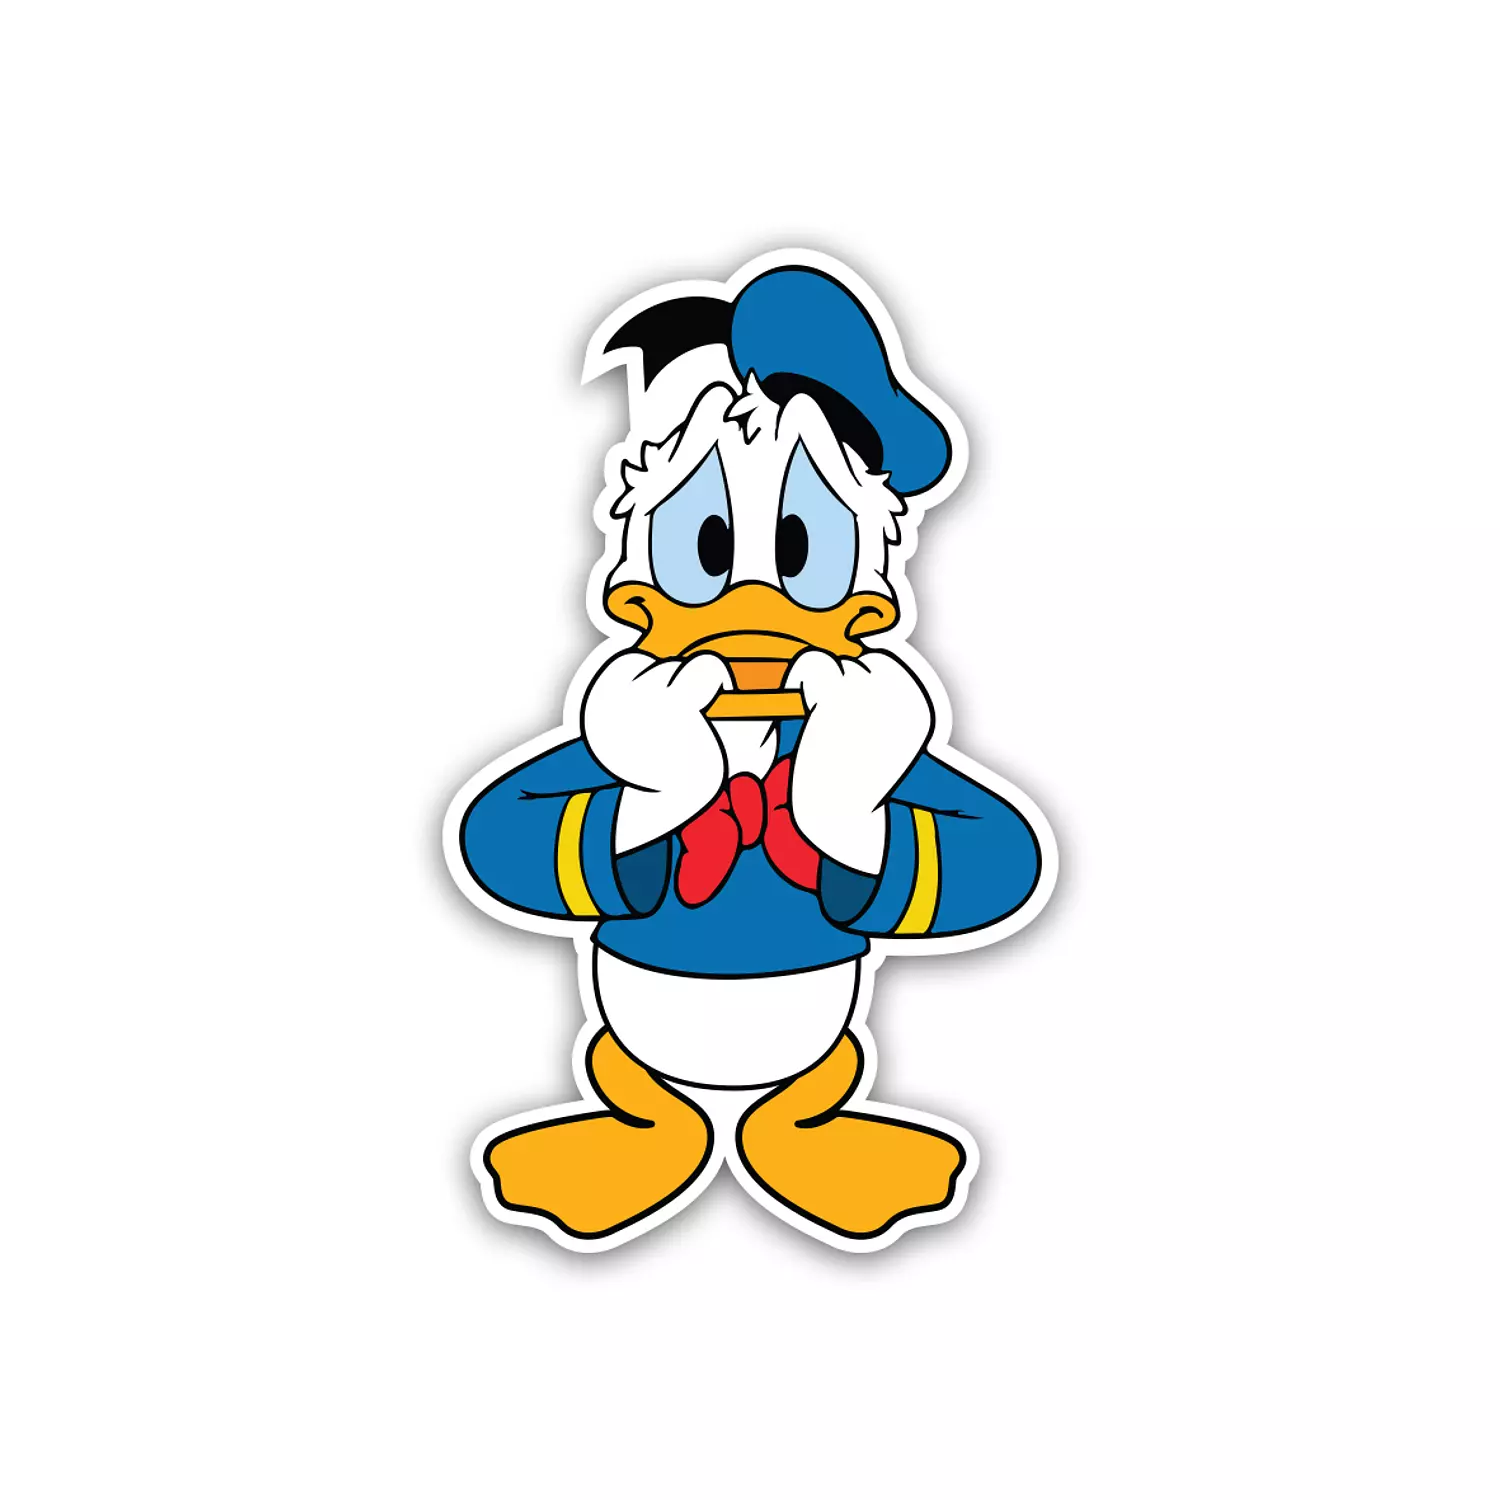 Donald Duck - Batoot hover image